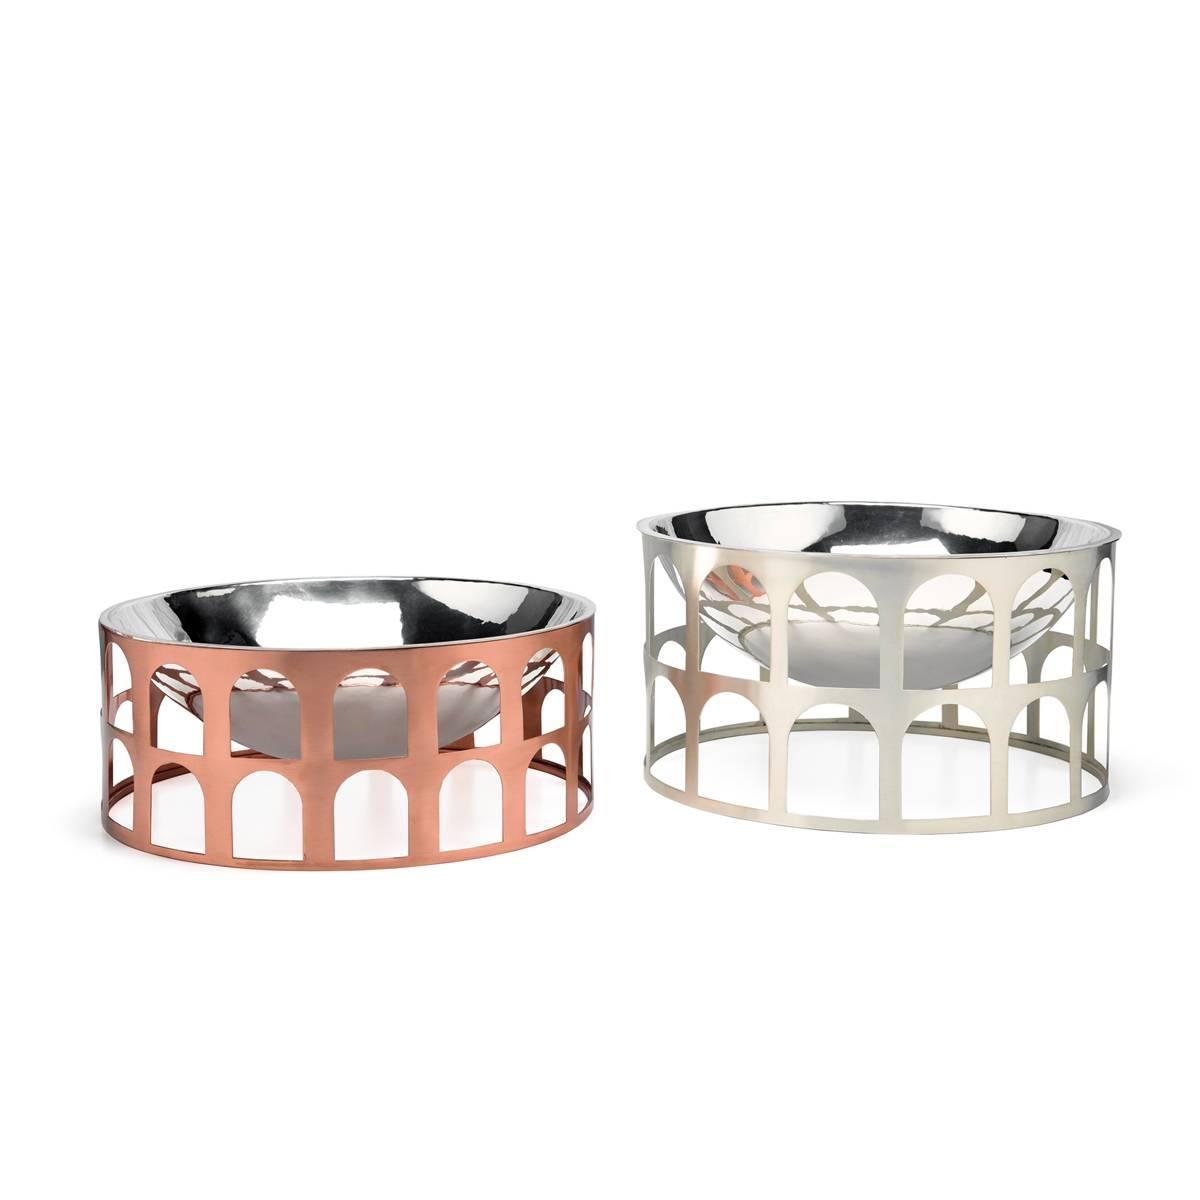 Colosseum III is a silver pleated metal centerpiece with copper base, it could be used also as fruit bowl
The product is part of the collection New Roman, by Jaime Hayon: inspired by the vessels of the Roman Empire, this collection transforms